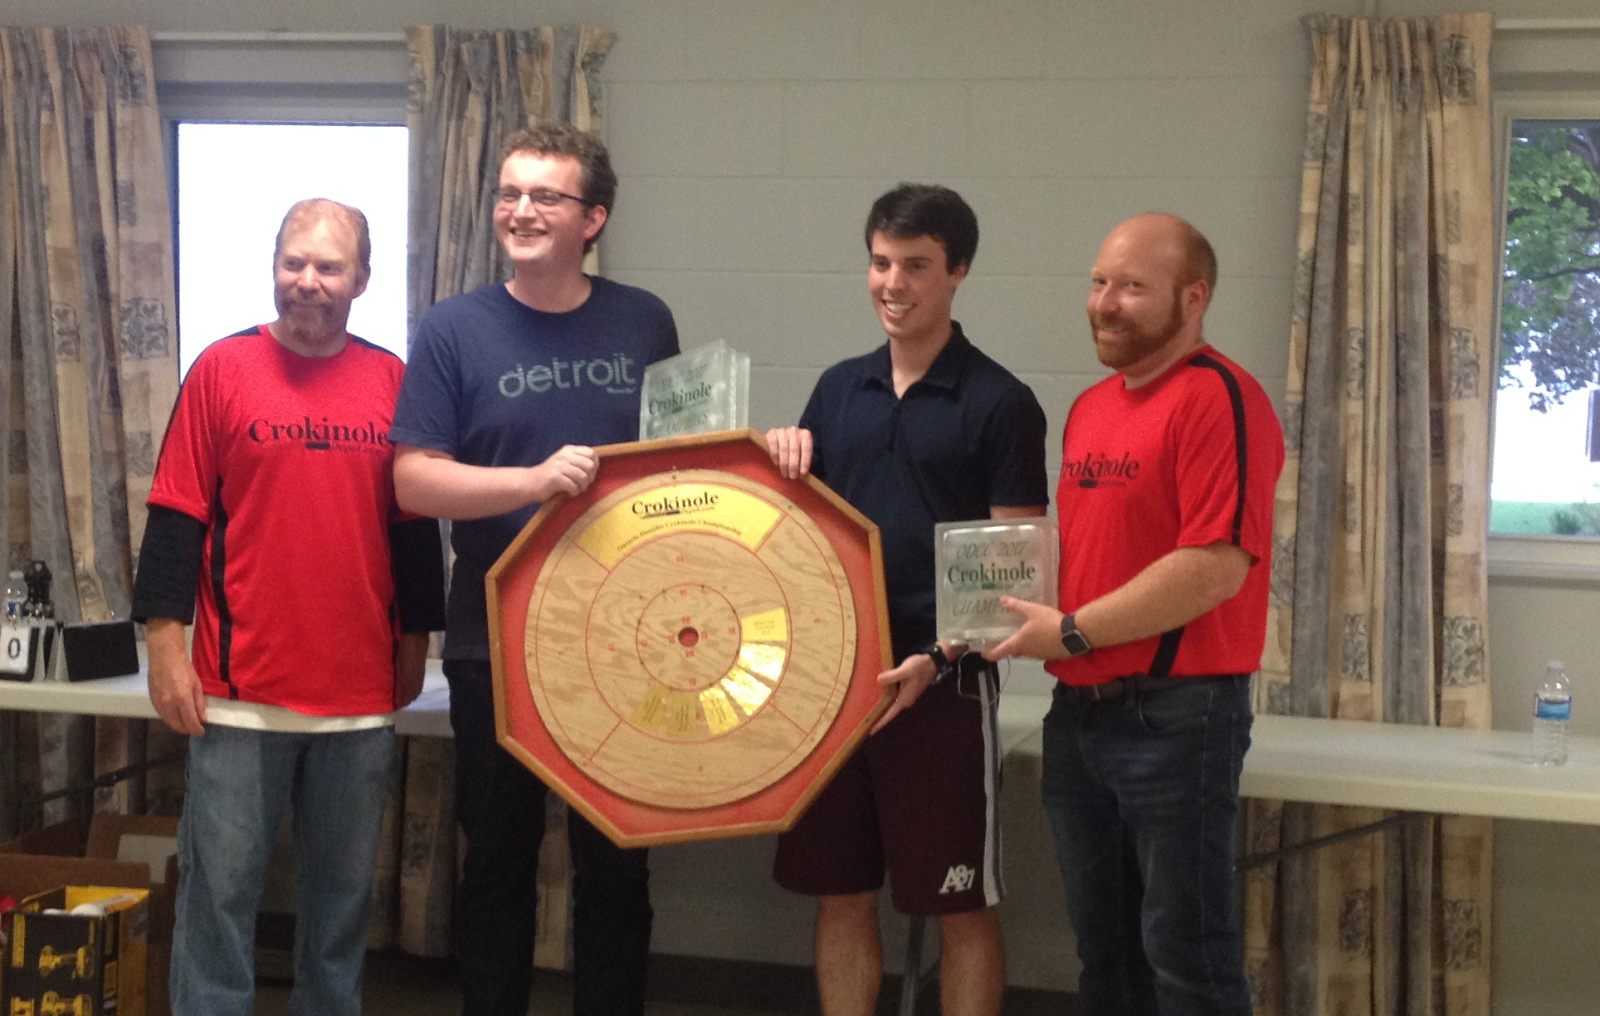 2017 Ontario Doubles Crokinole Champions Connor Reinman & Nathan Walsh